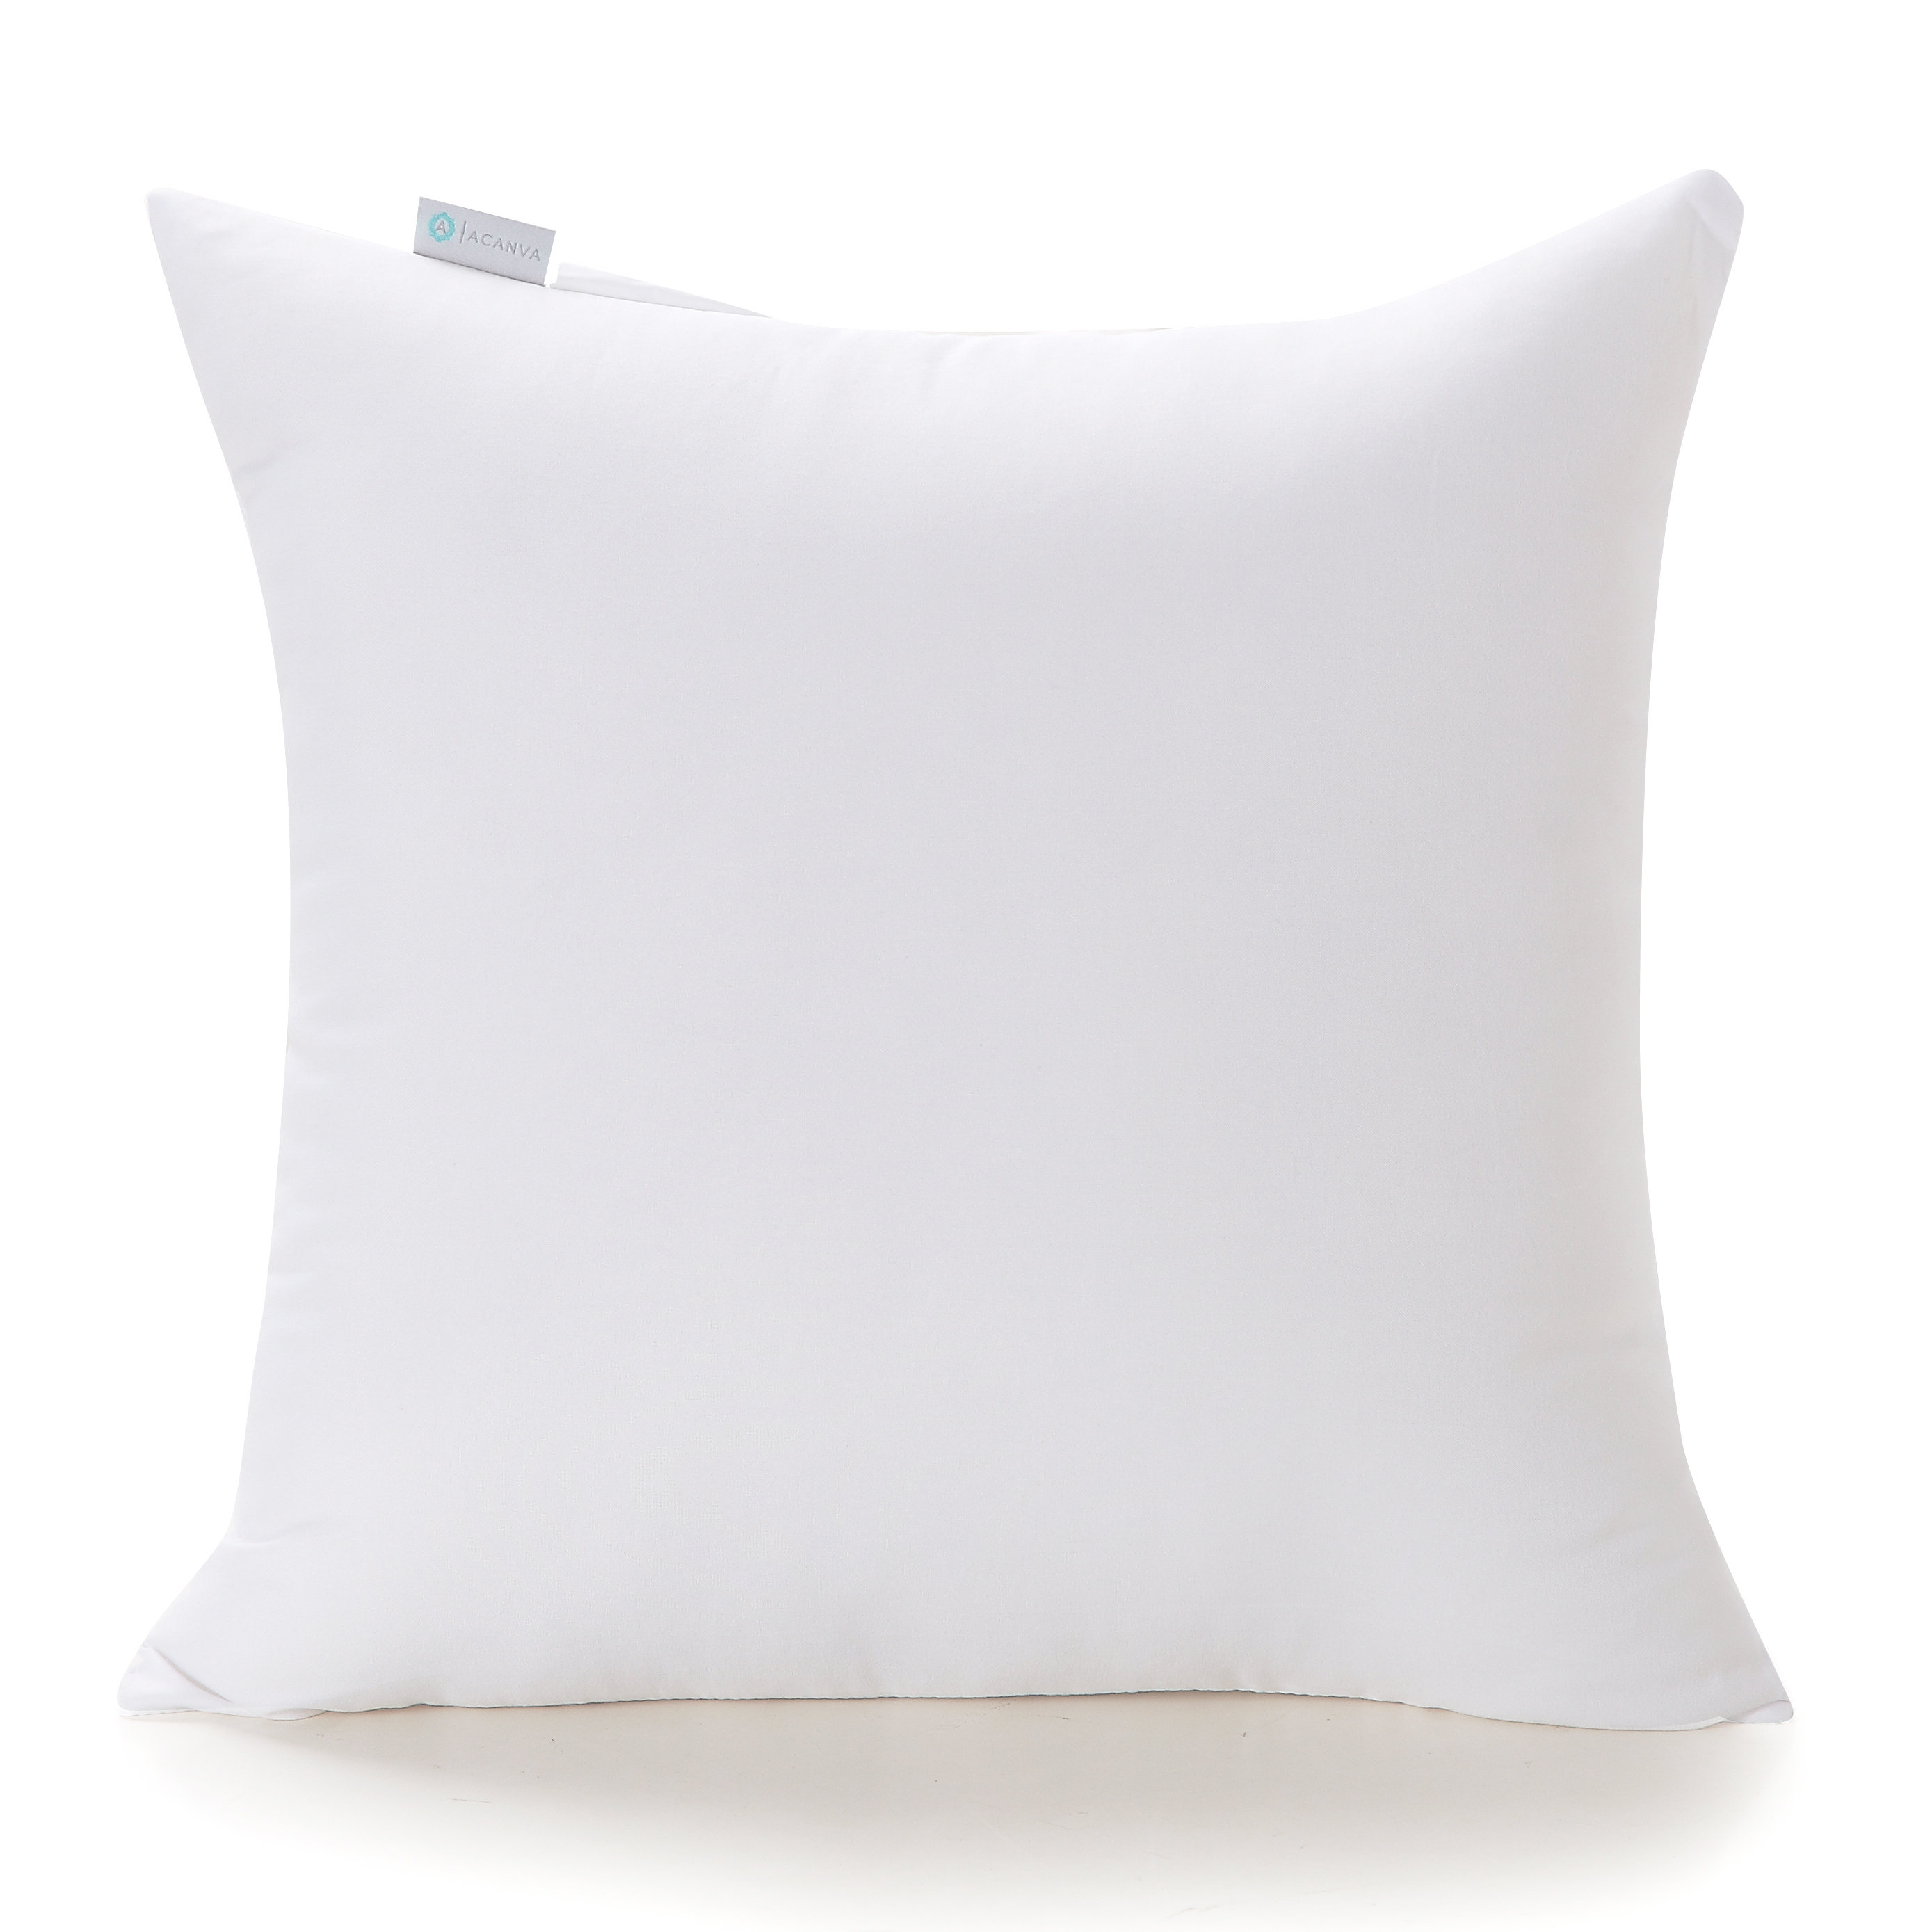 14 by 20-Inch D.L Rhein Laugh Embroidered Decorative Pillow